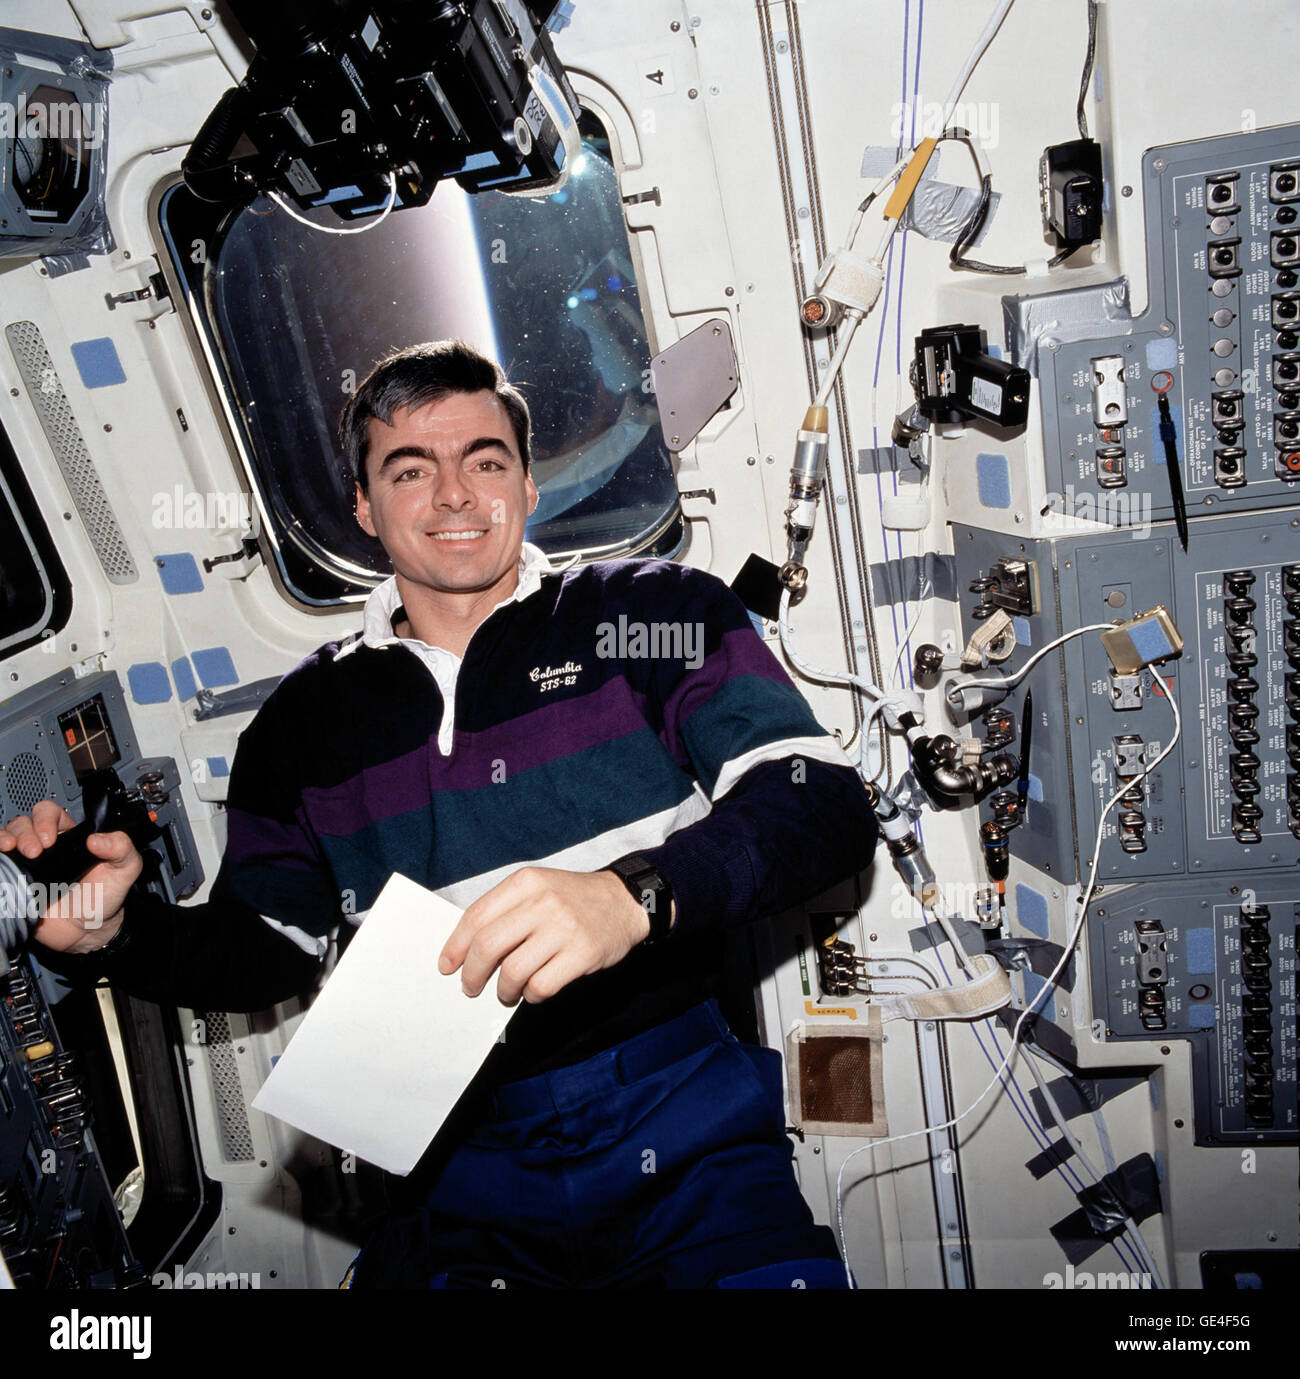 Pilot Andrew Allen posed for this picture on the Space Shuttle Columbia's flight deck during STS-62. Allen flew on three Space Shuttle missions: STS-46, STS-62, and STS-75.  Image #: sts062-113-099 Date: March 13, 1994 Stock Photo